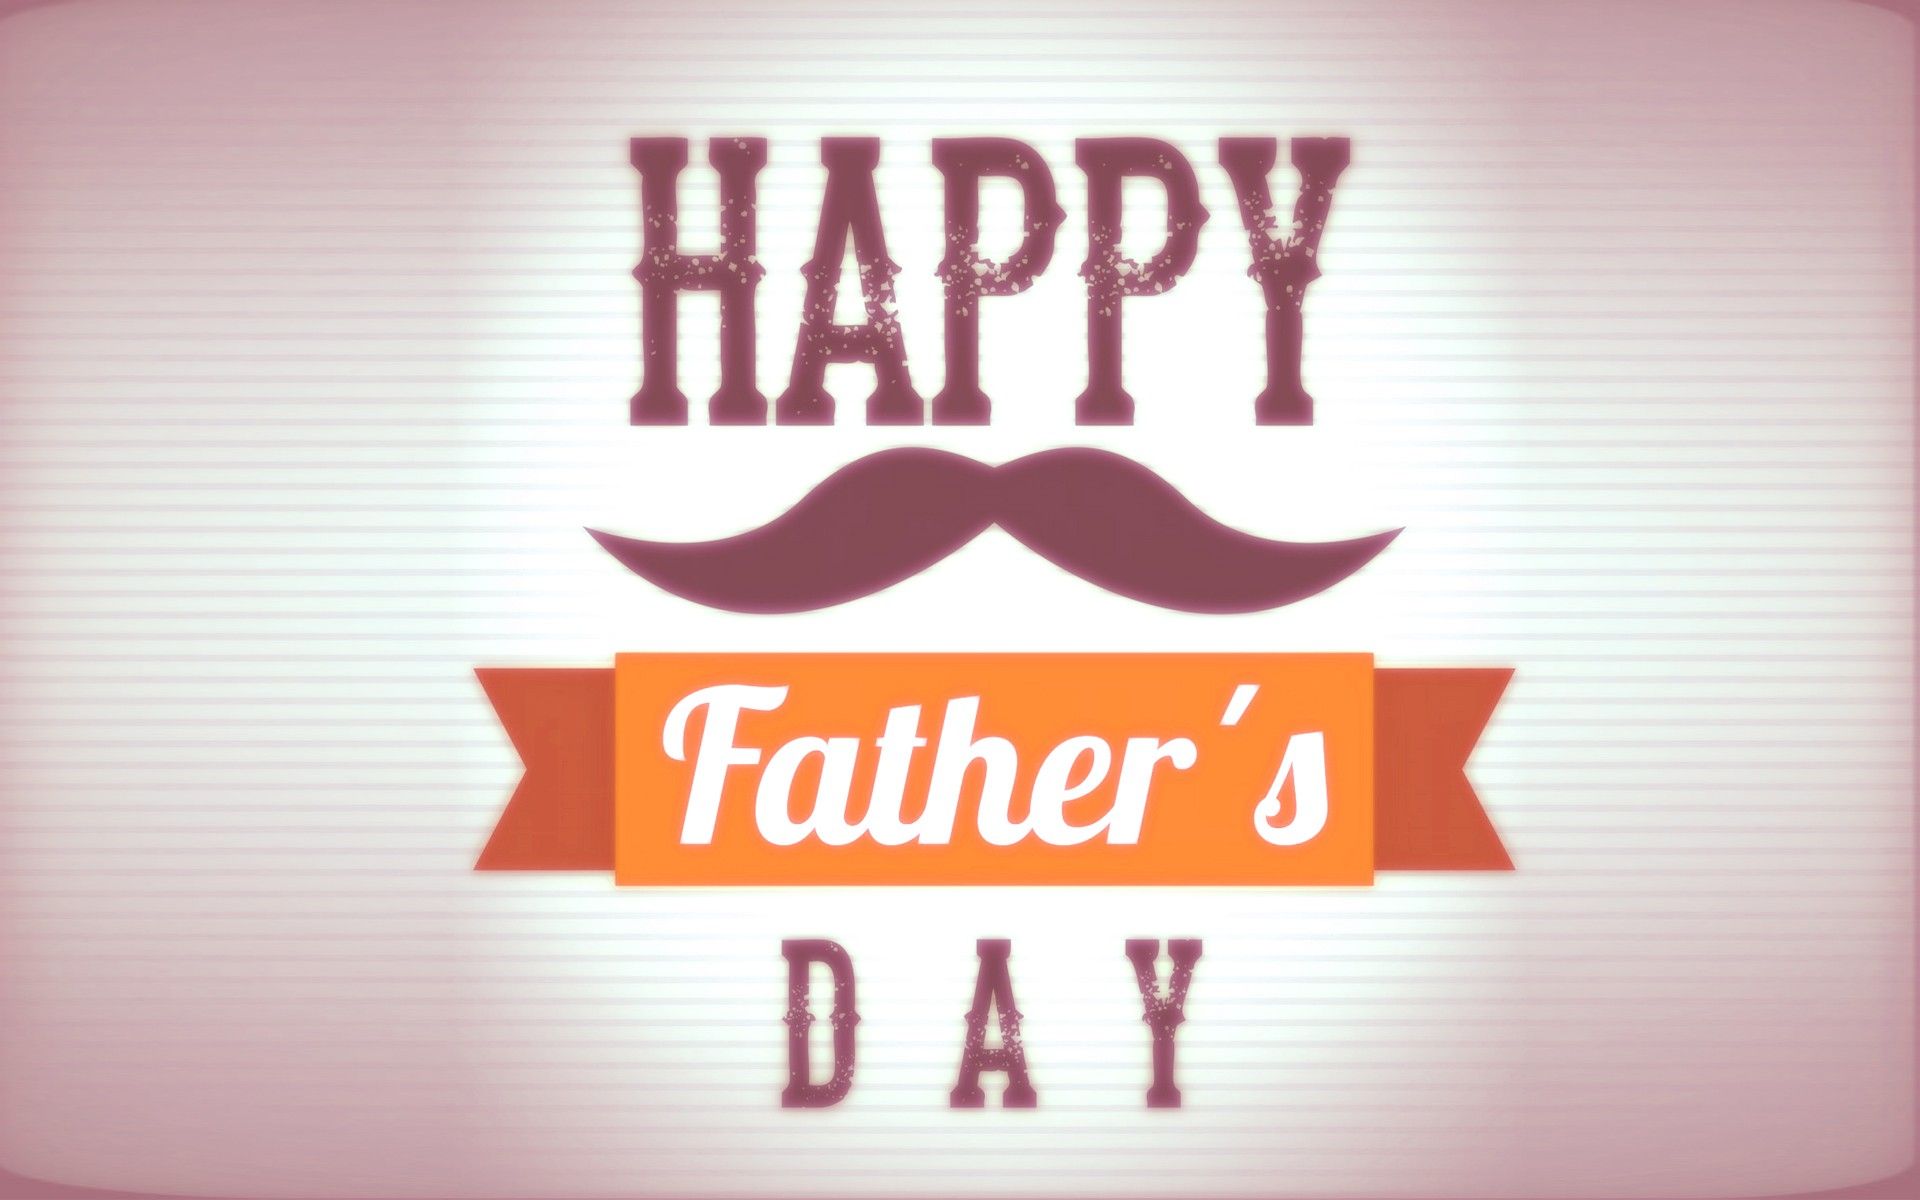 Happy Father's Day 2019 Greetings Wallpaper Whatsapp Status Dp